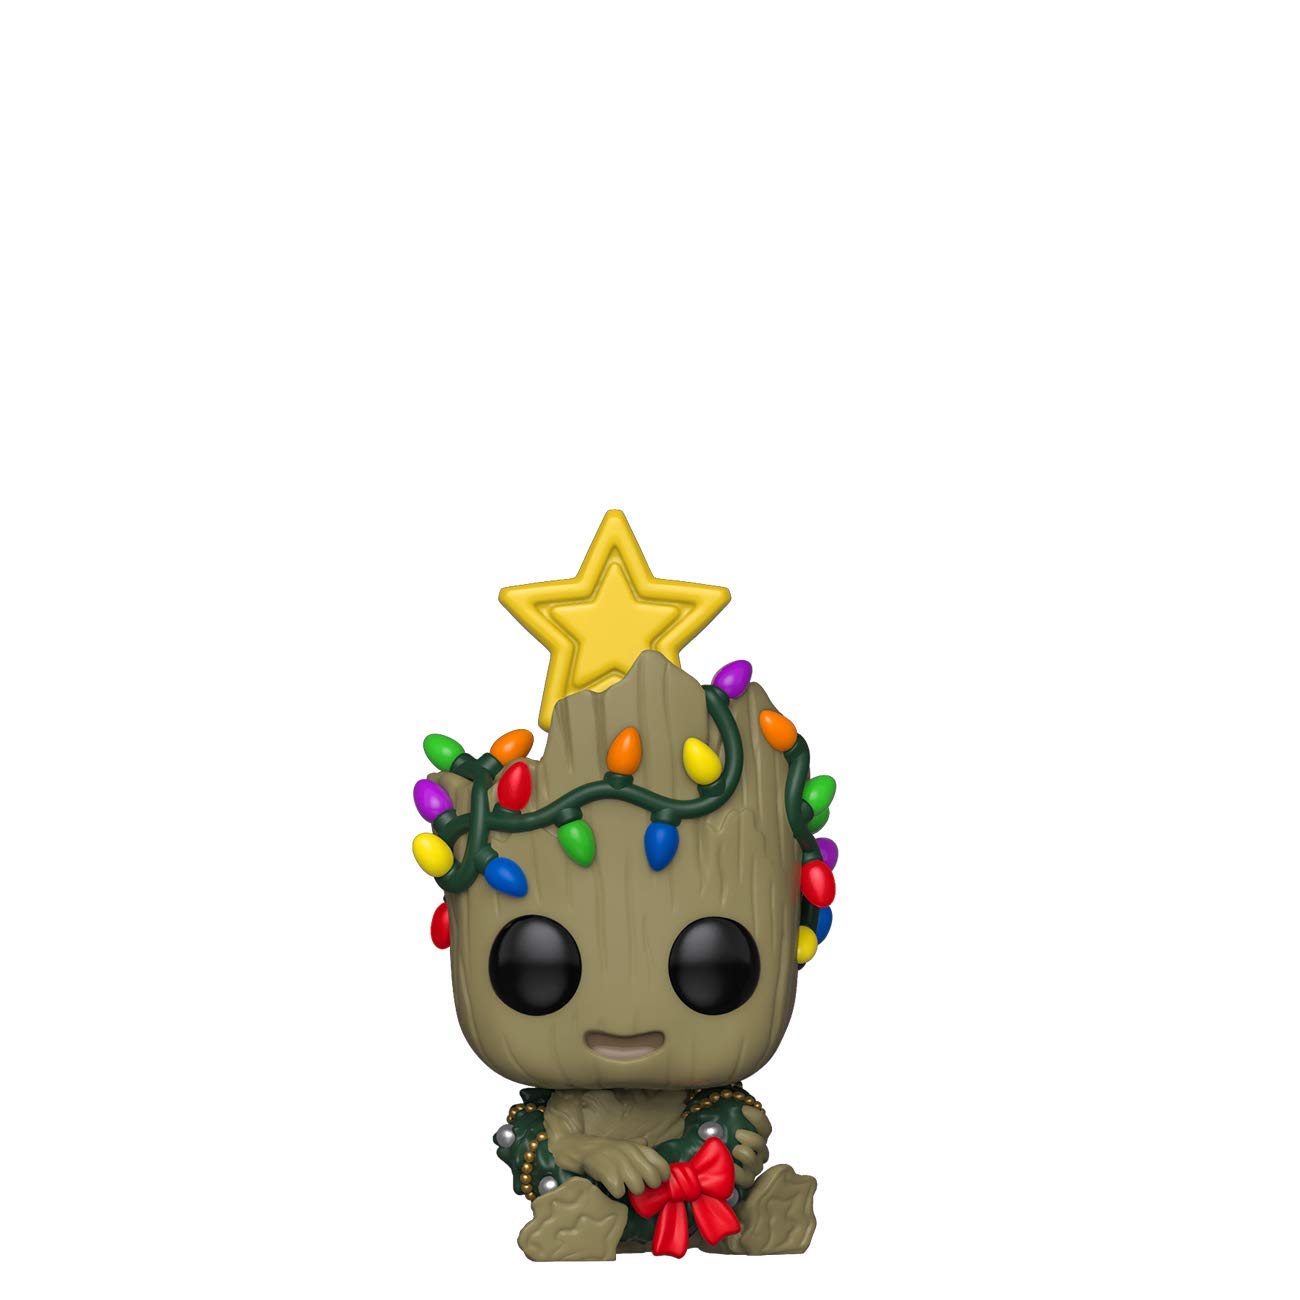 Funko Pop! Marvel: Holiday - Groot with Wreath